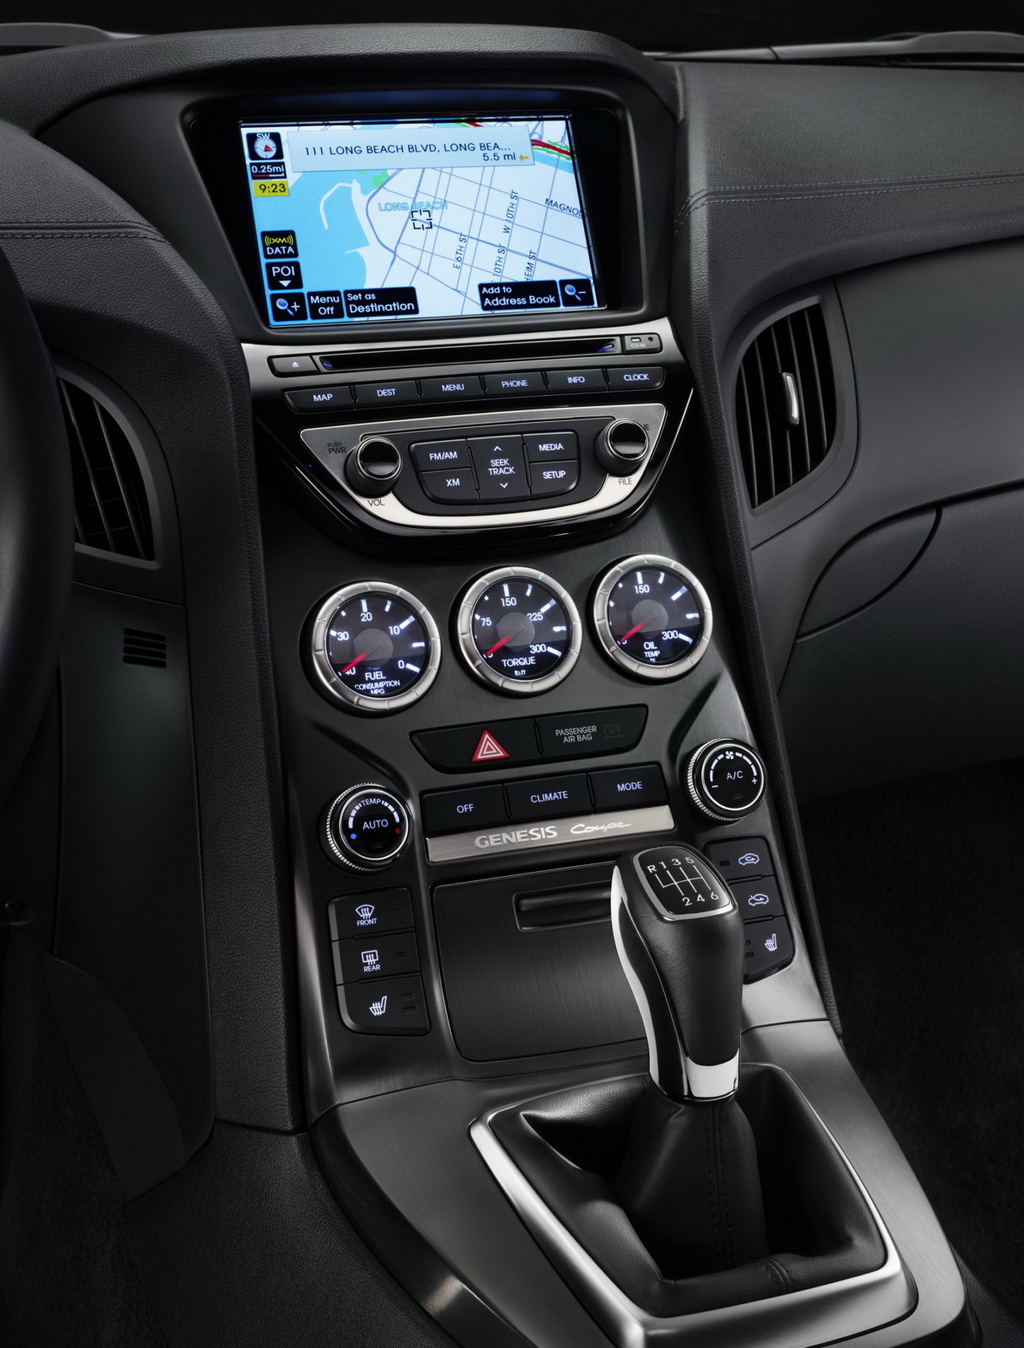 2011 Hyundai Genesis Coupe Receives Interior Refinements And